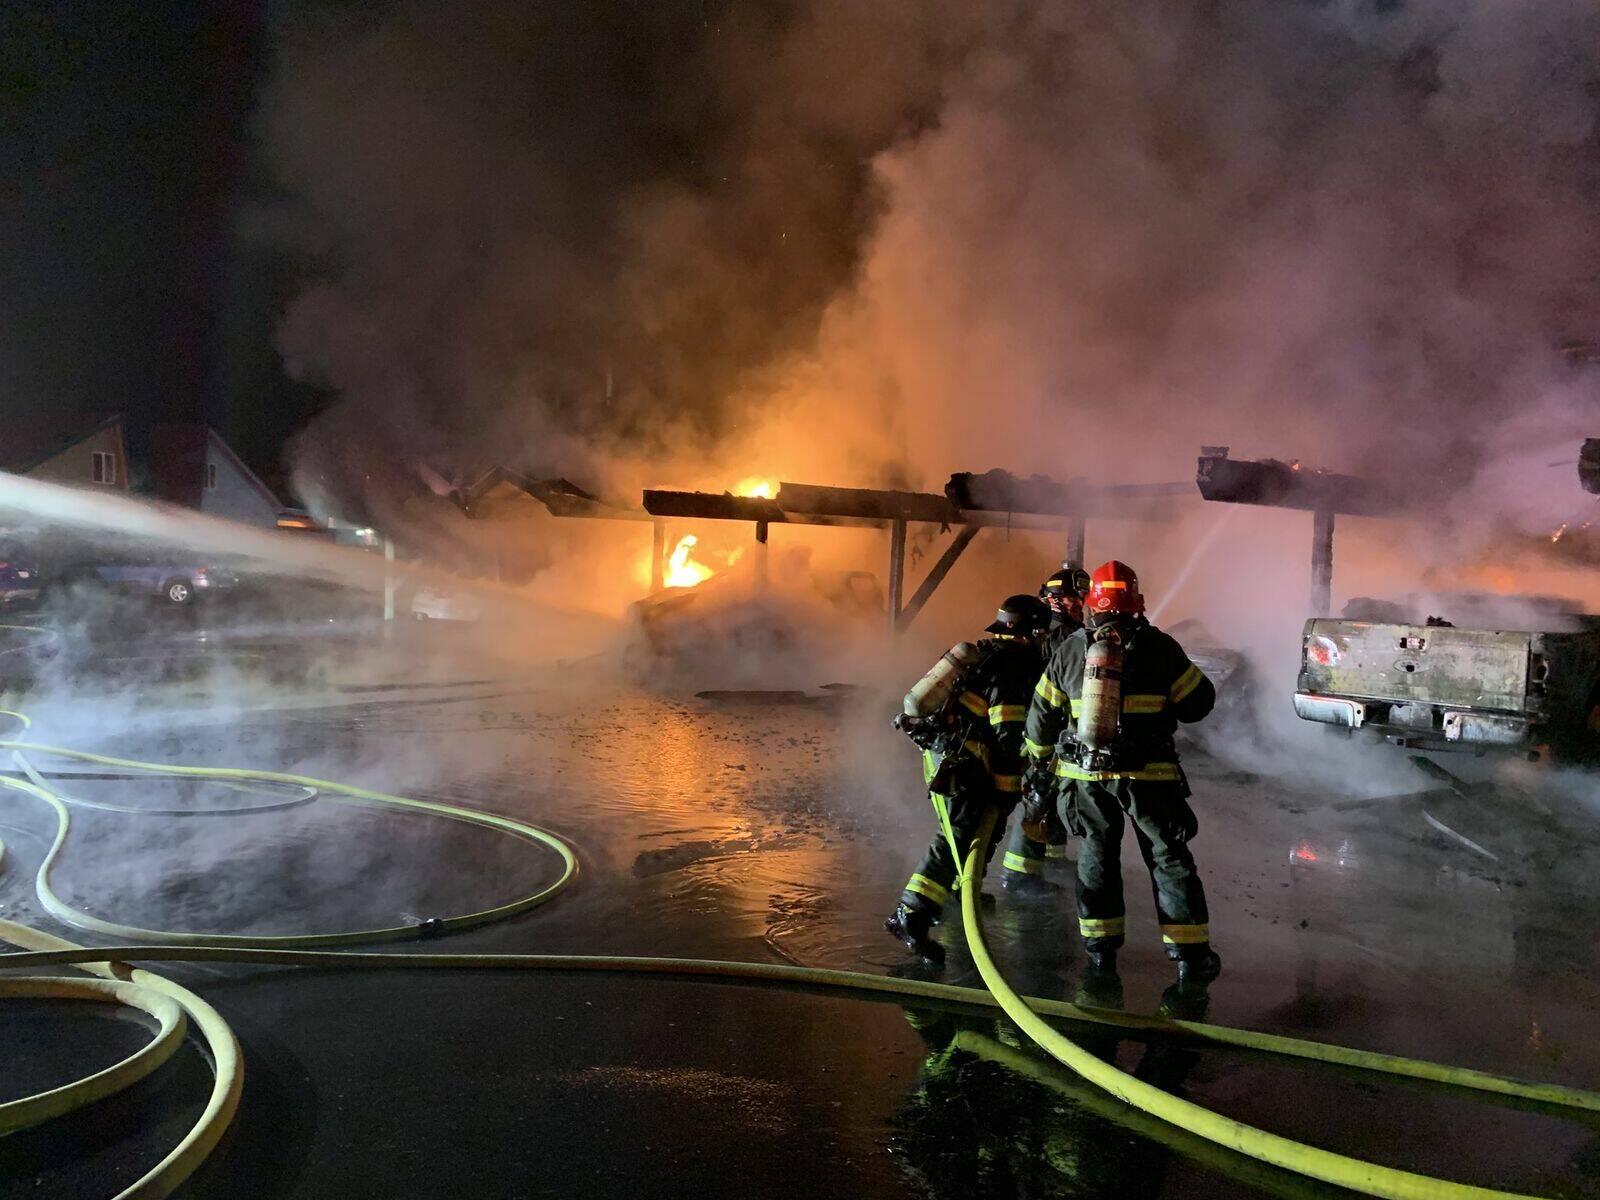 Firefighters spray water at a carport engulfed in flames at the Riverfront Apartment complex on 8th Street Southeast. The apartment complex was engulfed in a three-alarm fire Nov. 7. Photo courtesy of Valley Regional Fire Authority